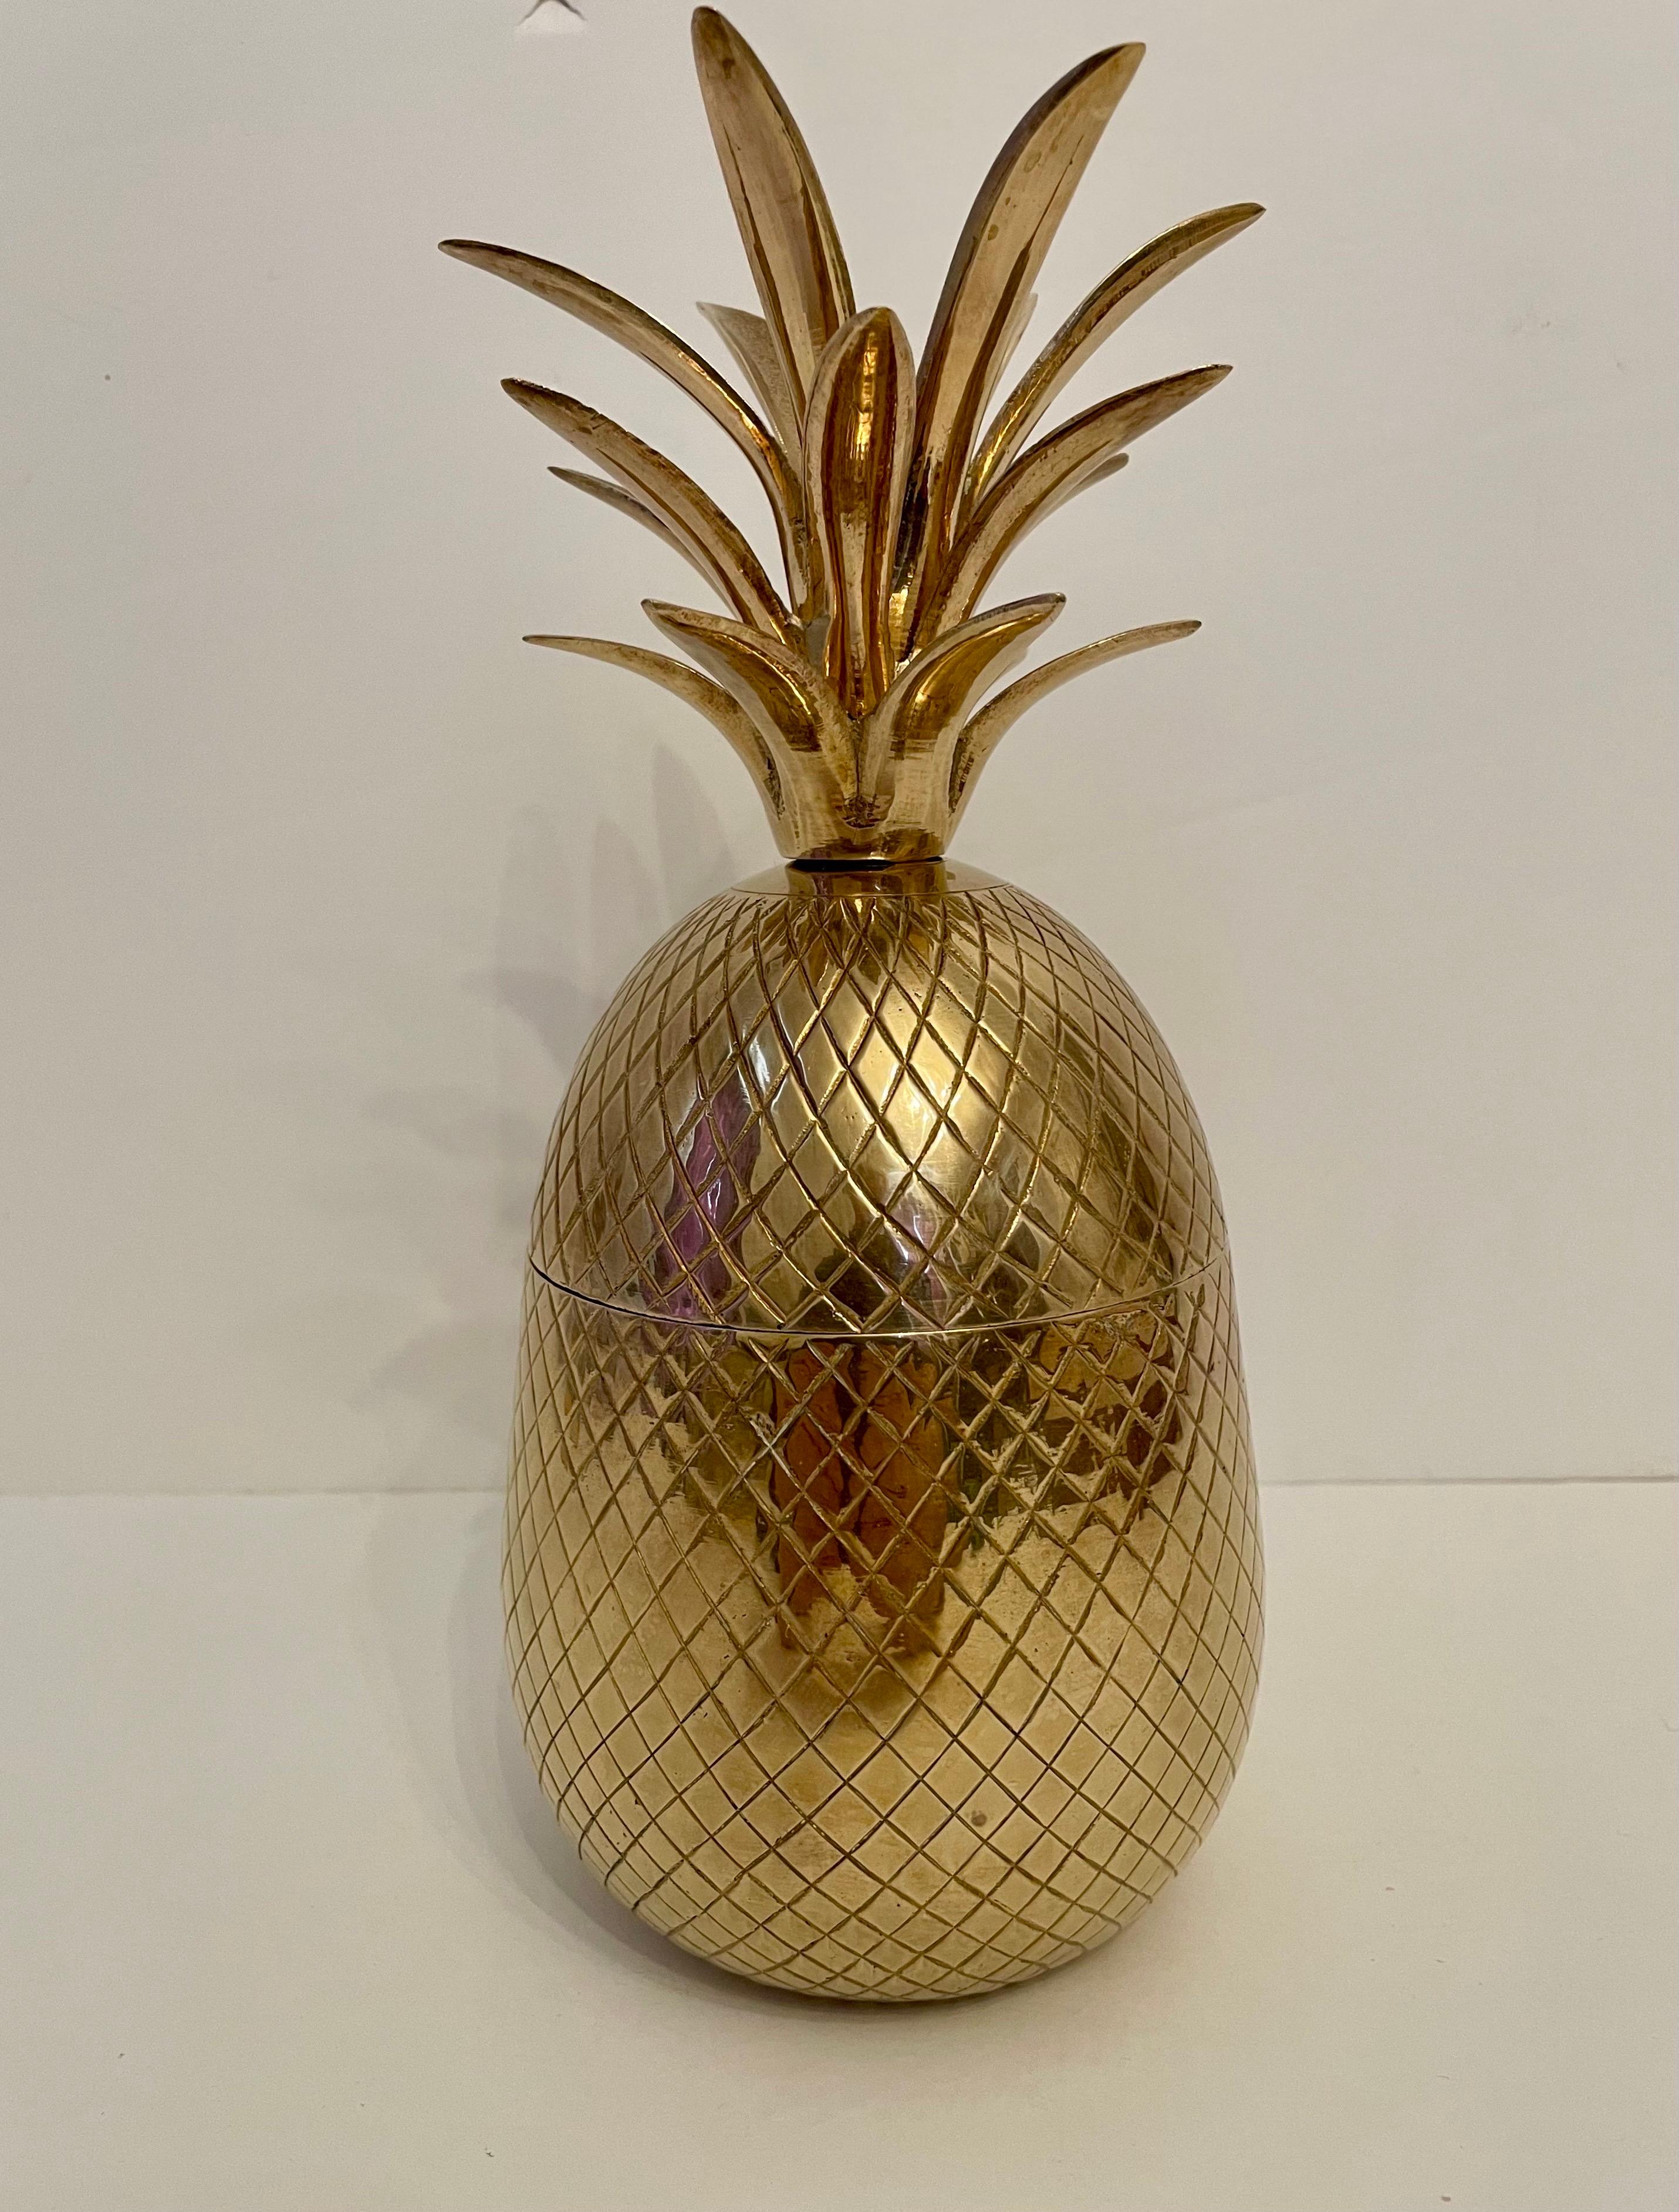 Brass pineapple shaped covered container. Good overall condition. Any dark or light areas in photos is reflection. Hand polished. Measures: 10” tall x 4.5” diameter